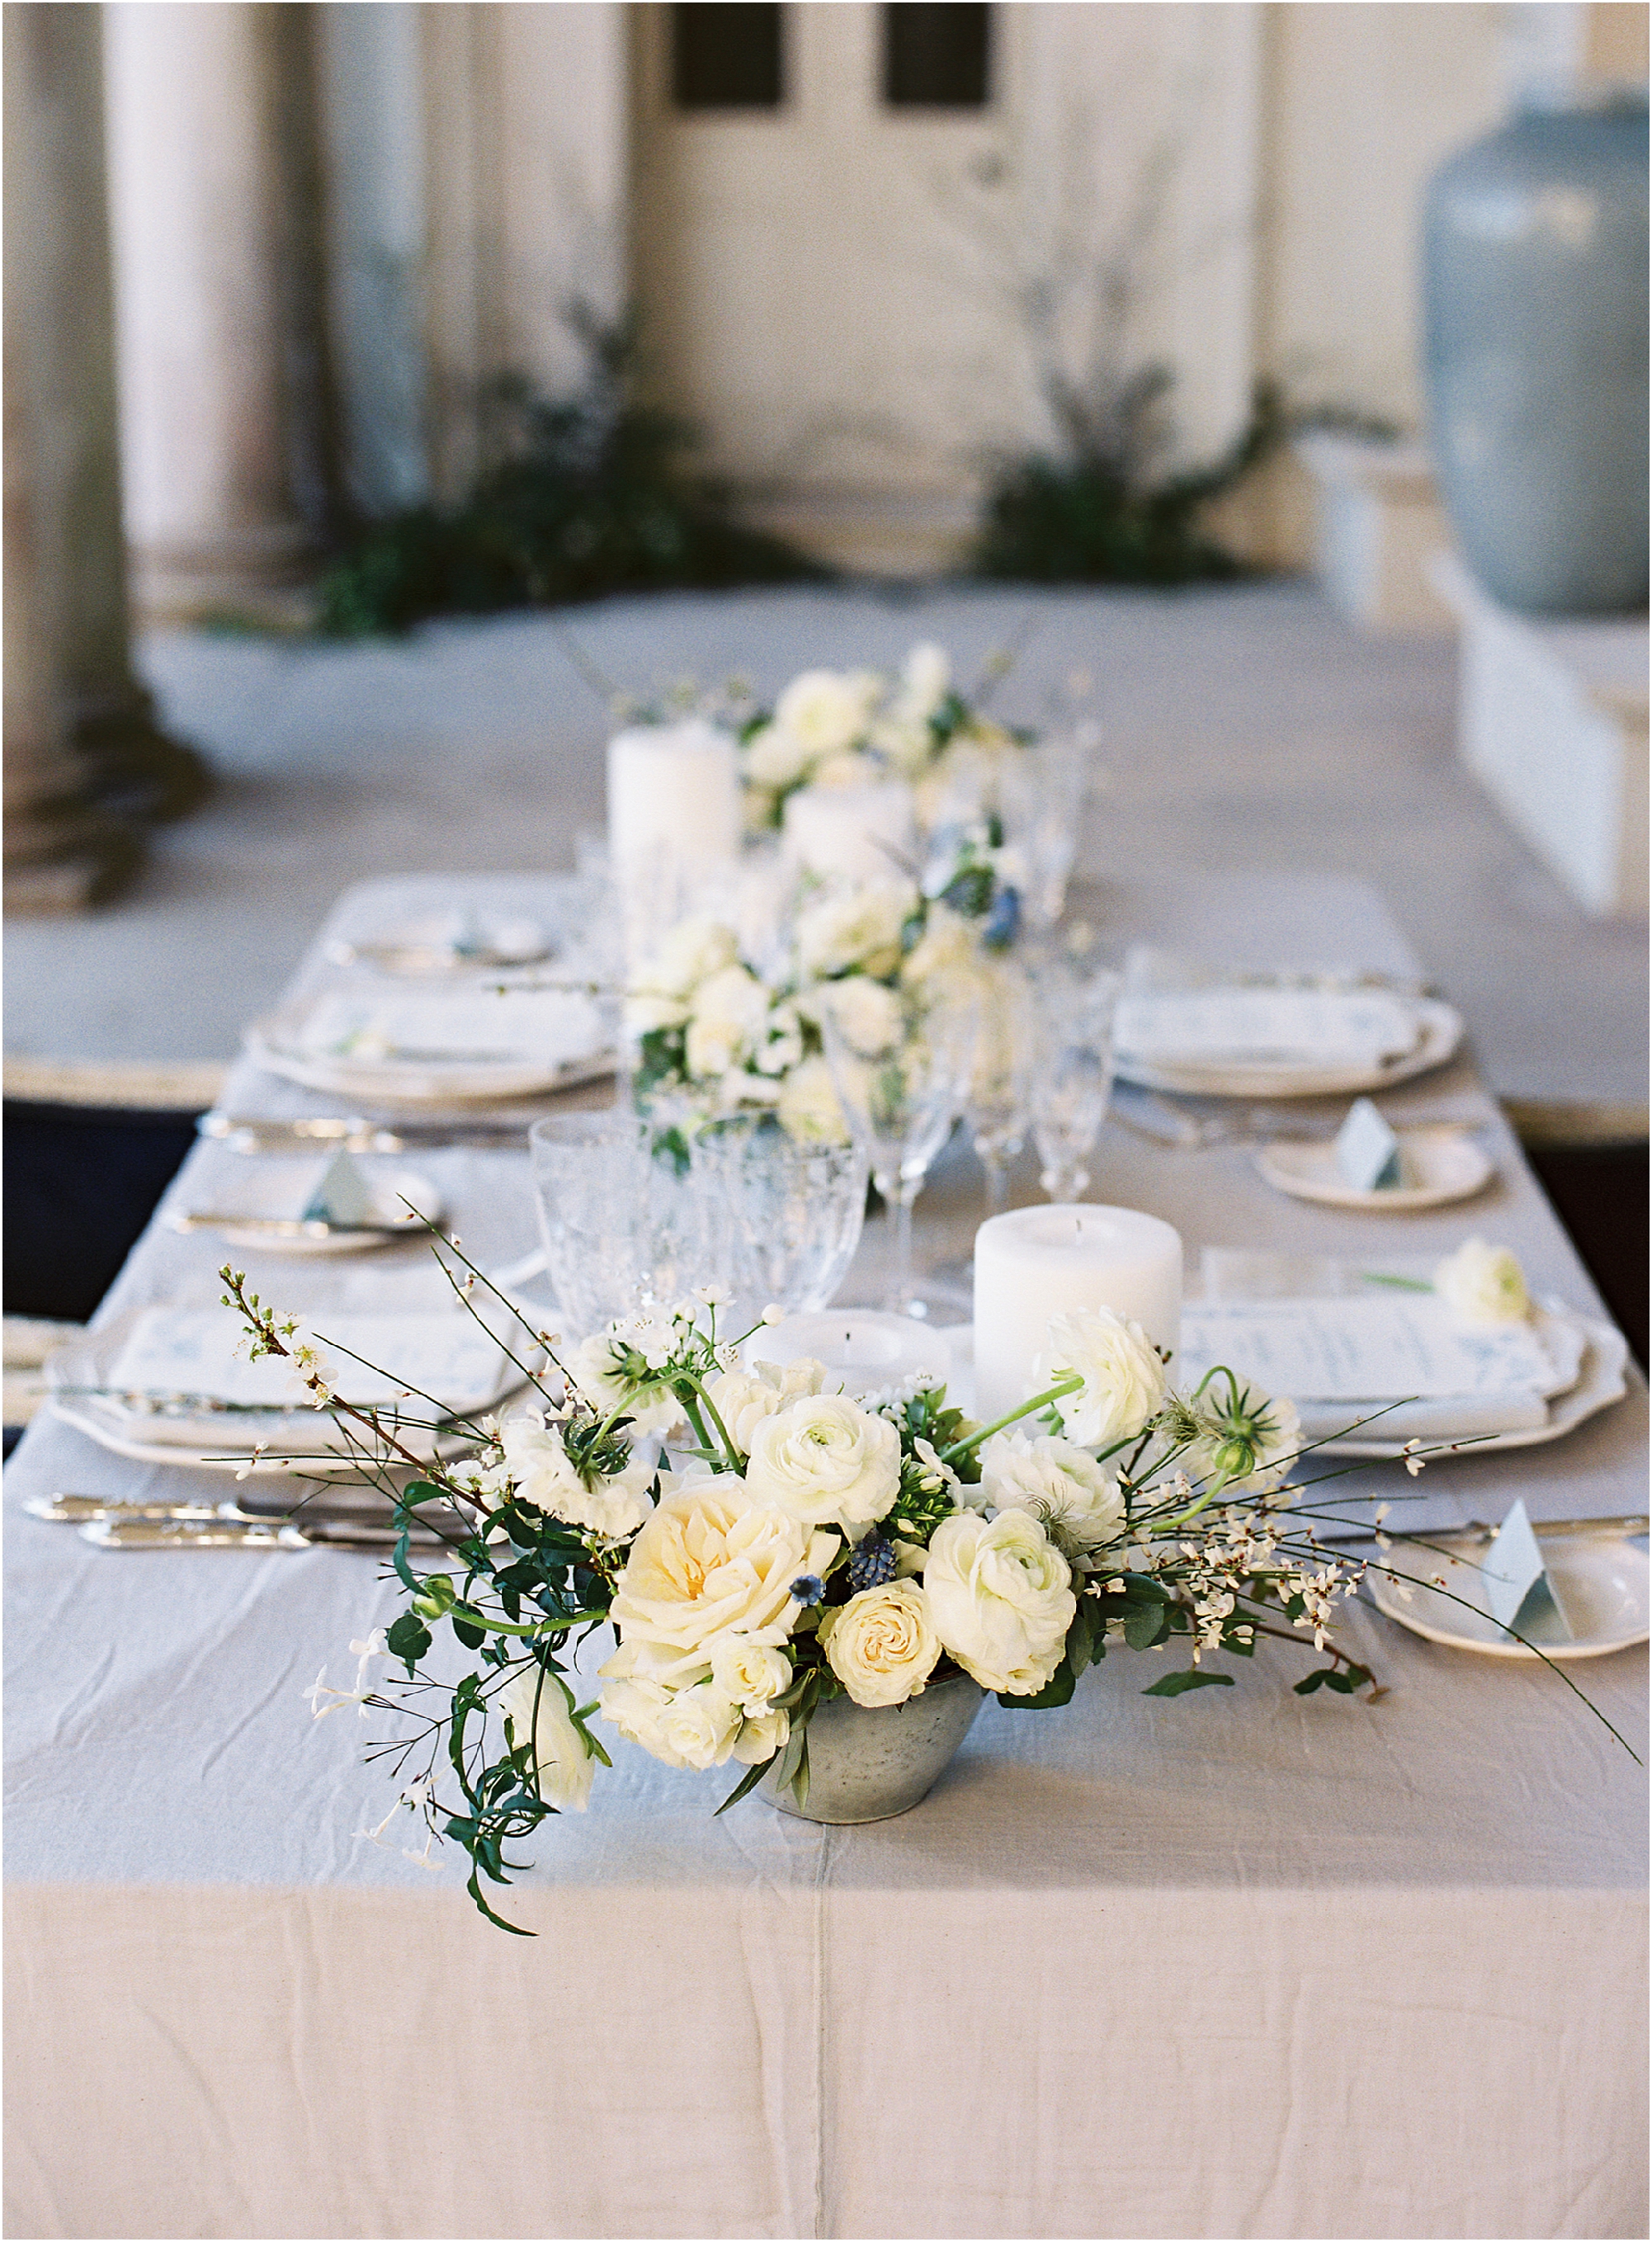 White, green and grey colour scheme for wedding breakfast table